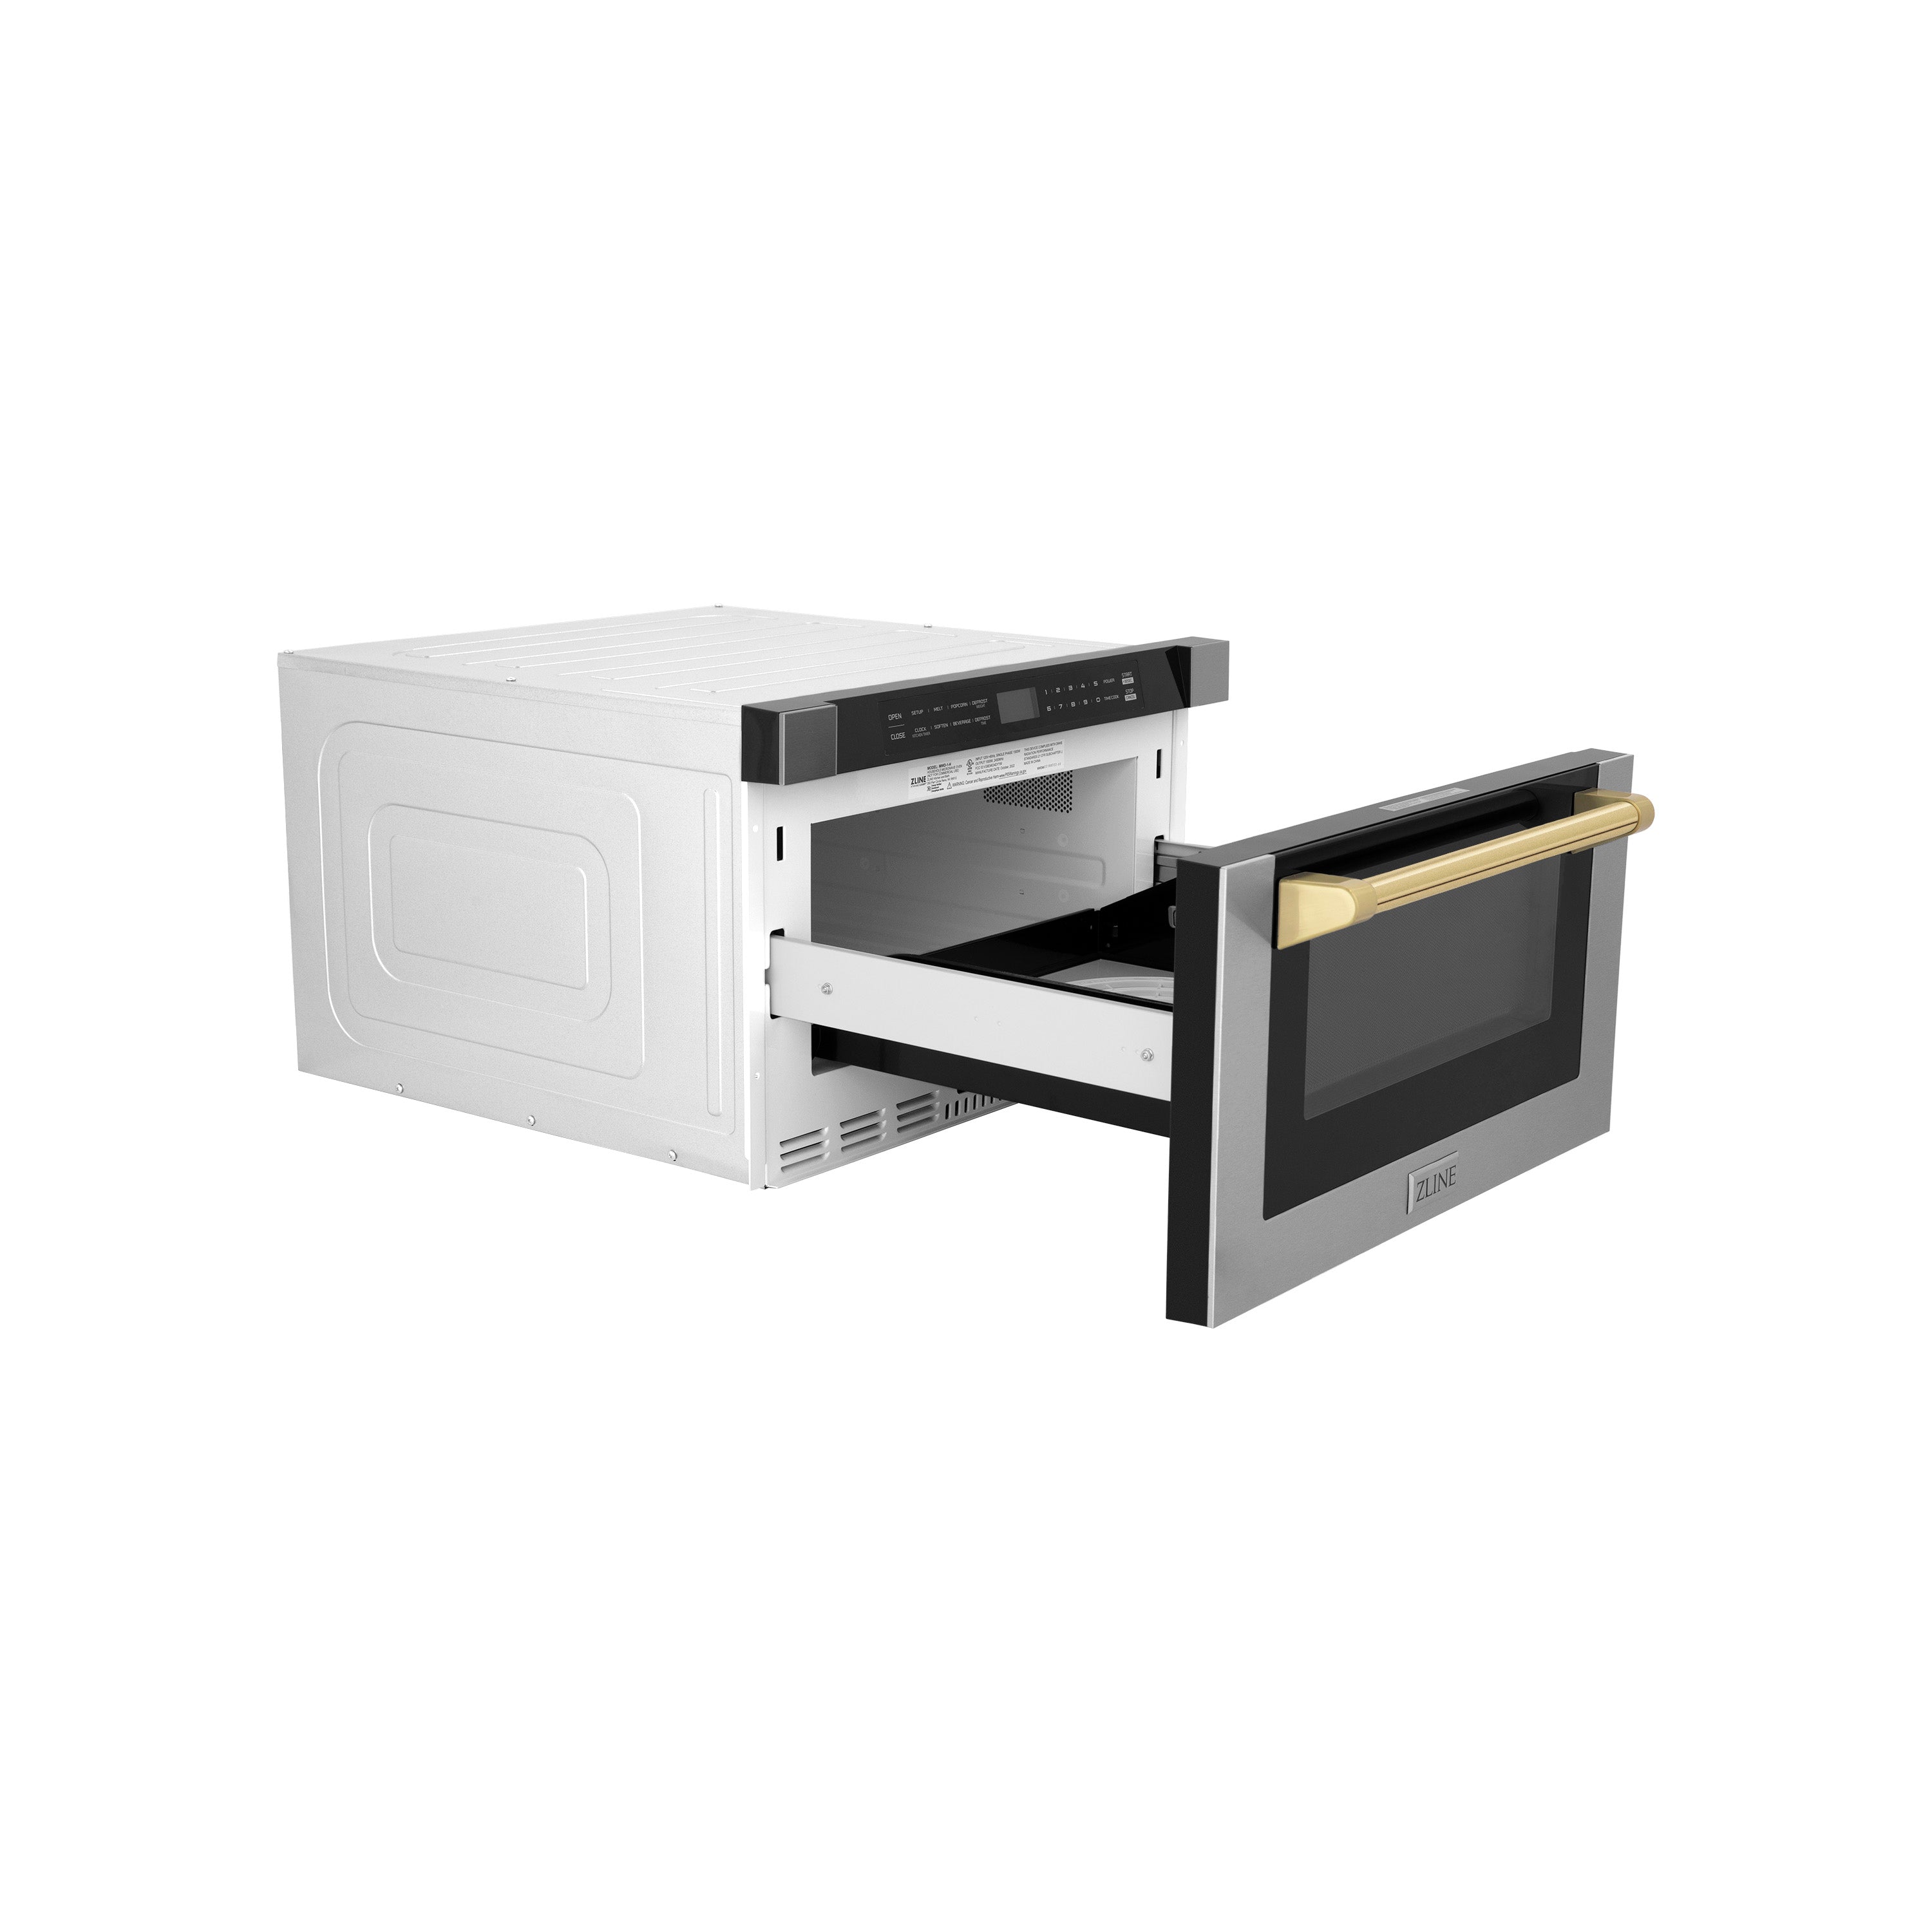 ZLINE Autograph Edition 24" 1.2 cu. ft. Built-in Microwave Drawer with a Traditional Handle in Stainless Steel and Polished Gold Accents